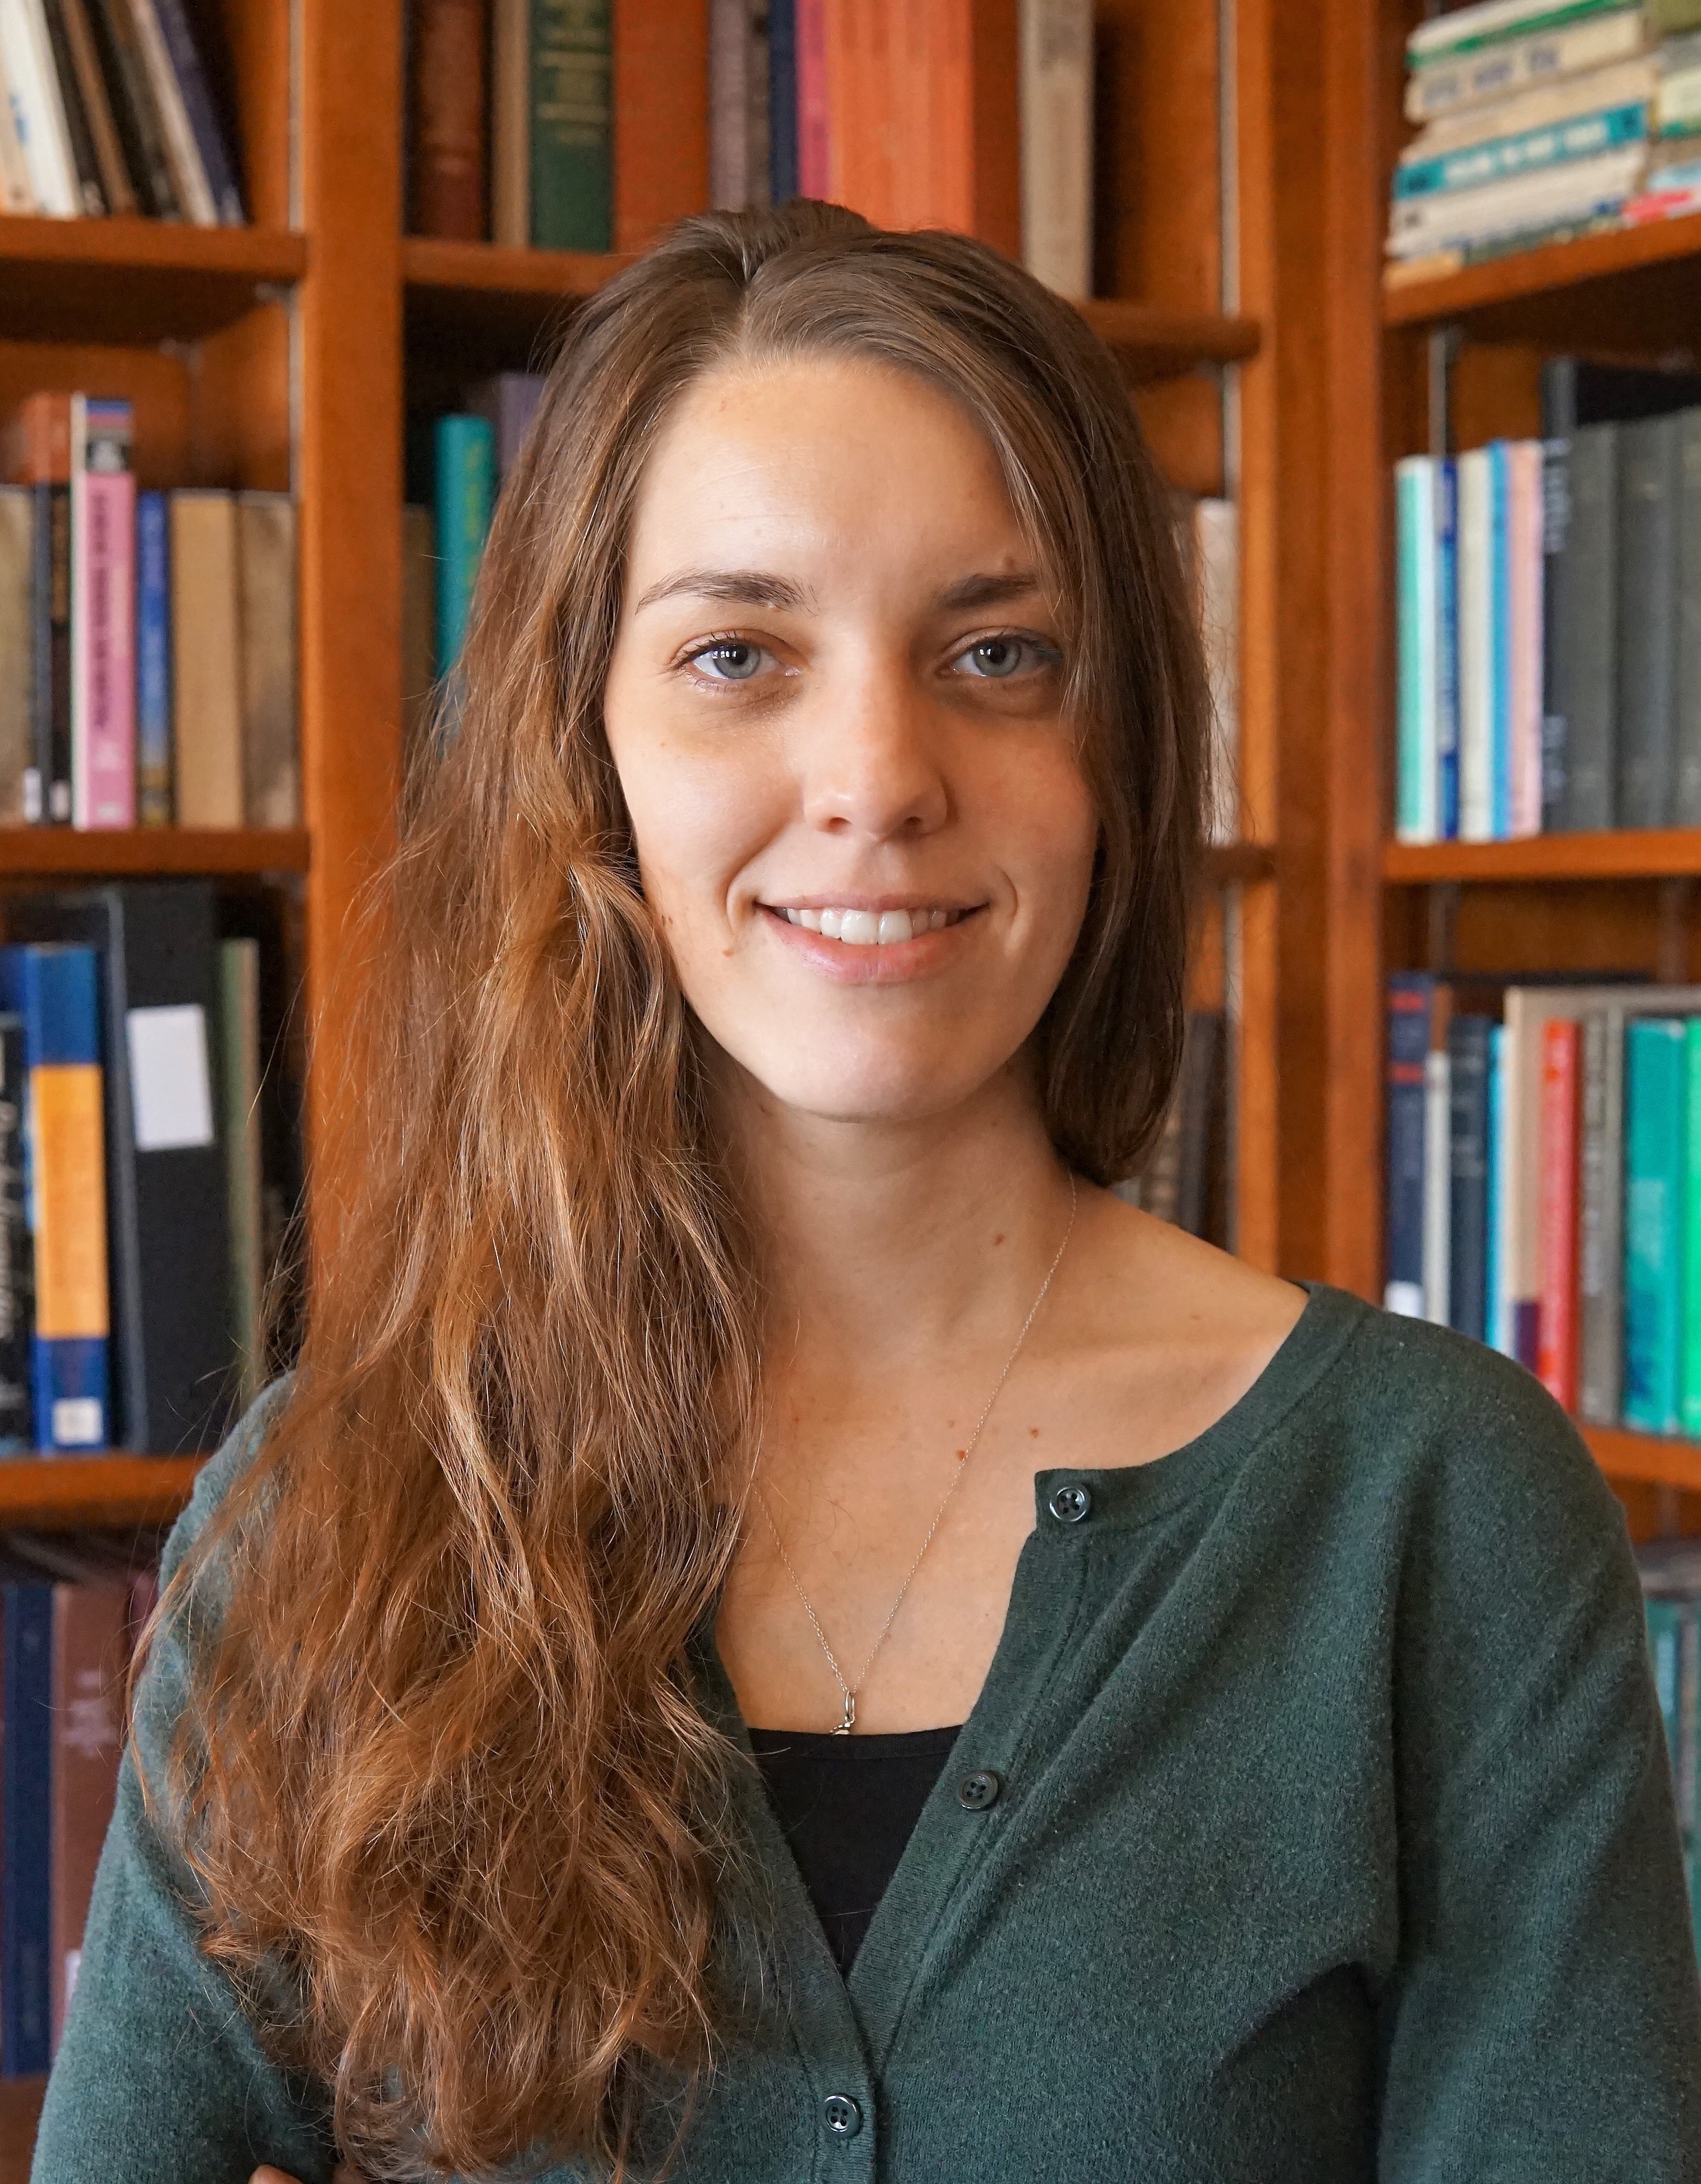 Headshot of Kashia Rosenau, smiling in front of a bookshelf, wearing a dark green pullover shirt with a black tank underneath.  Description automatically generated